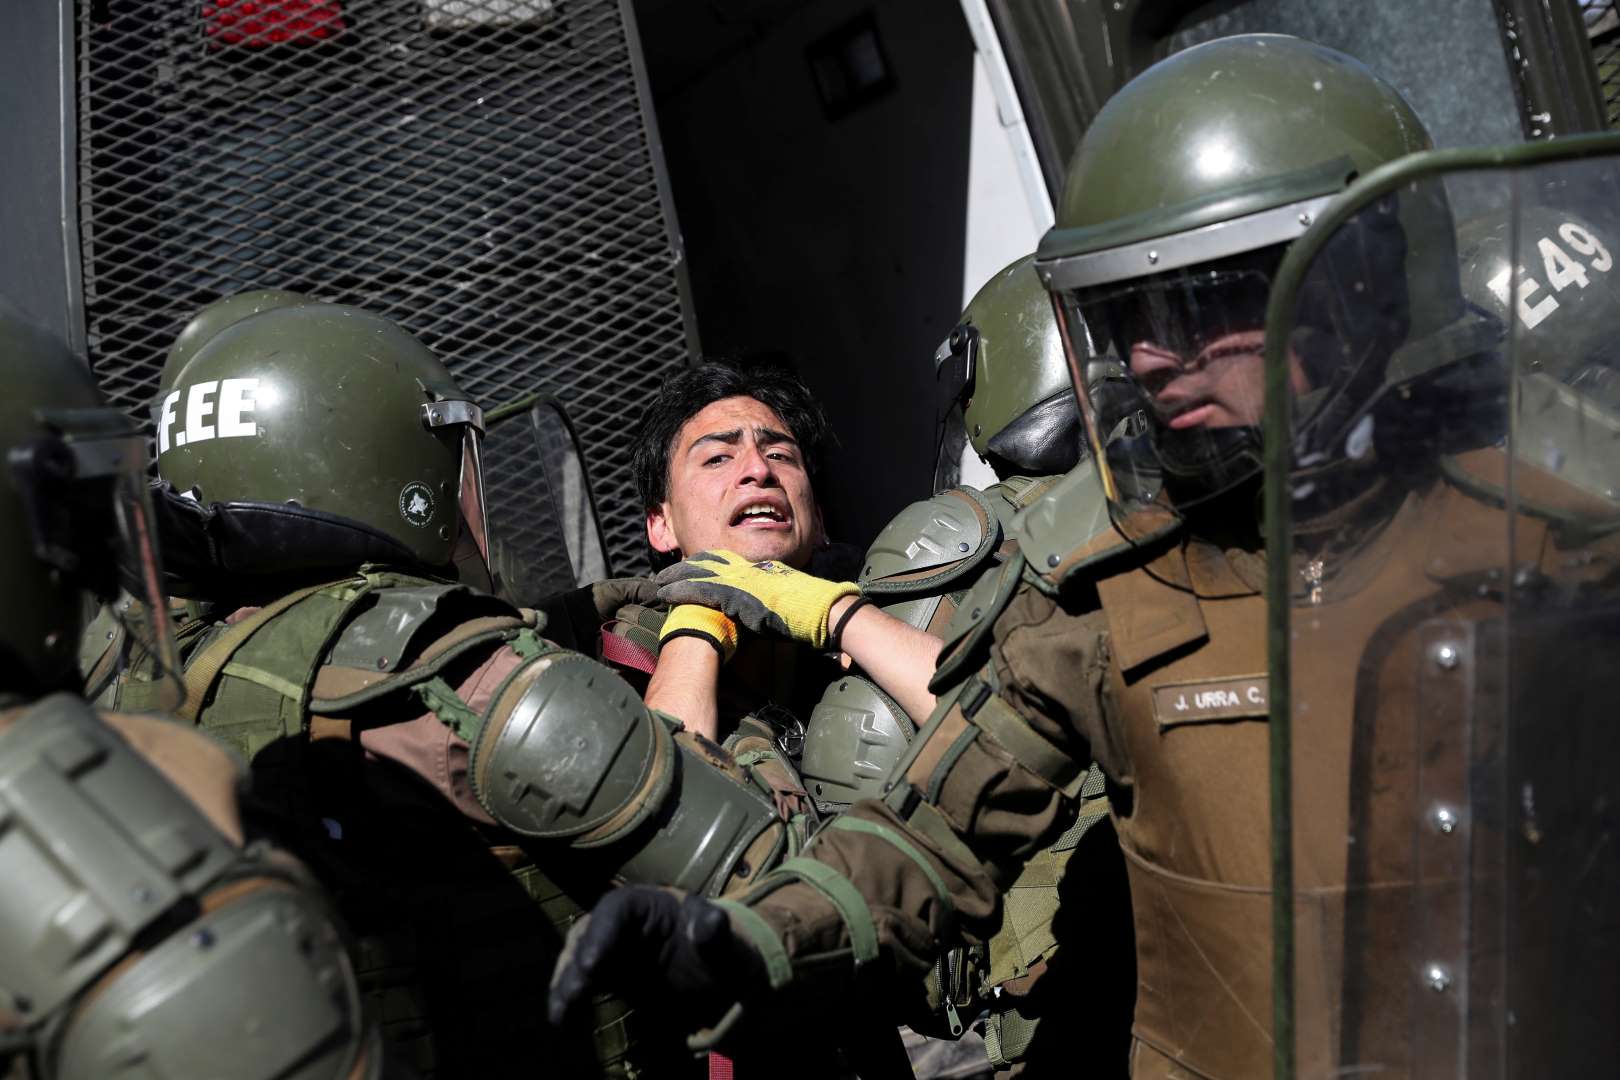 Members of security forces detain a demonstrator during an anti-government protest in Santiago, Chile. Photo: Edgard Garrido / REUTERS